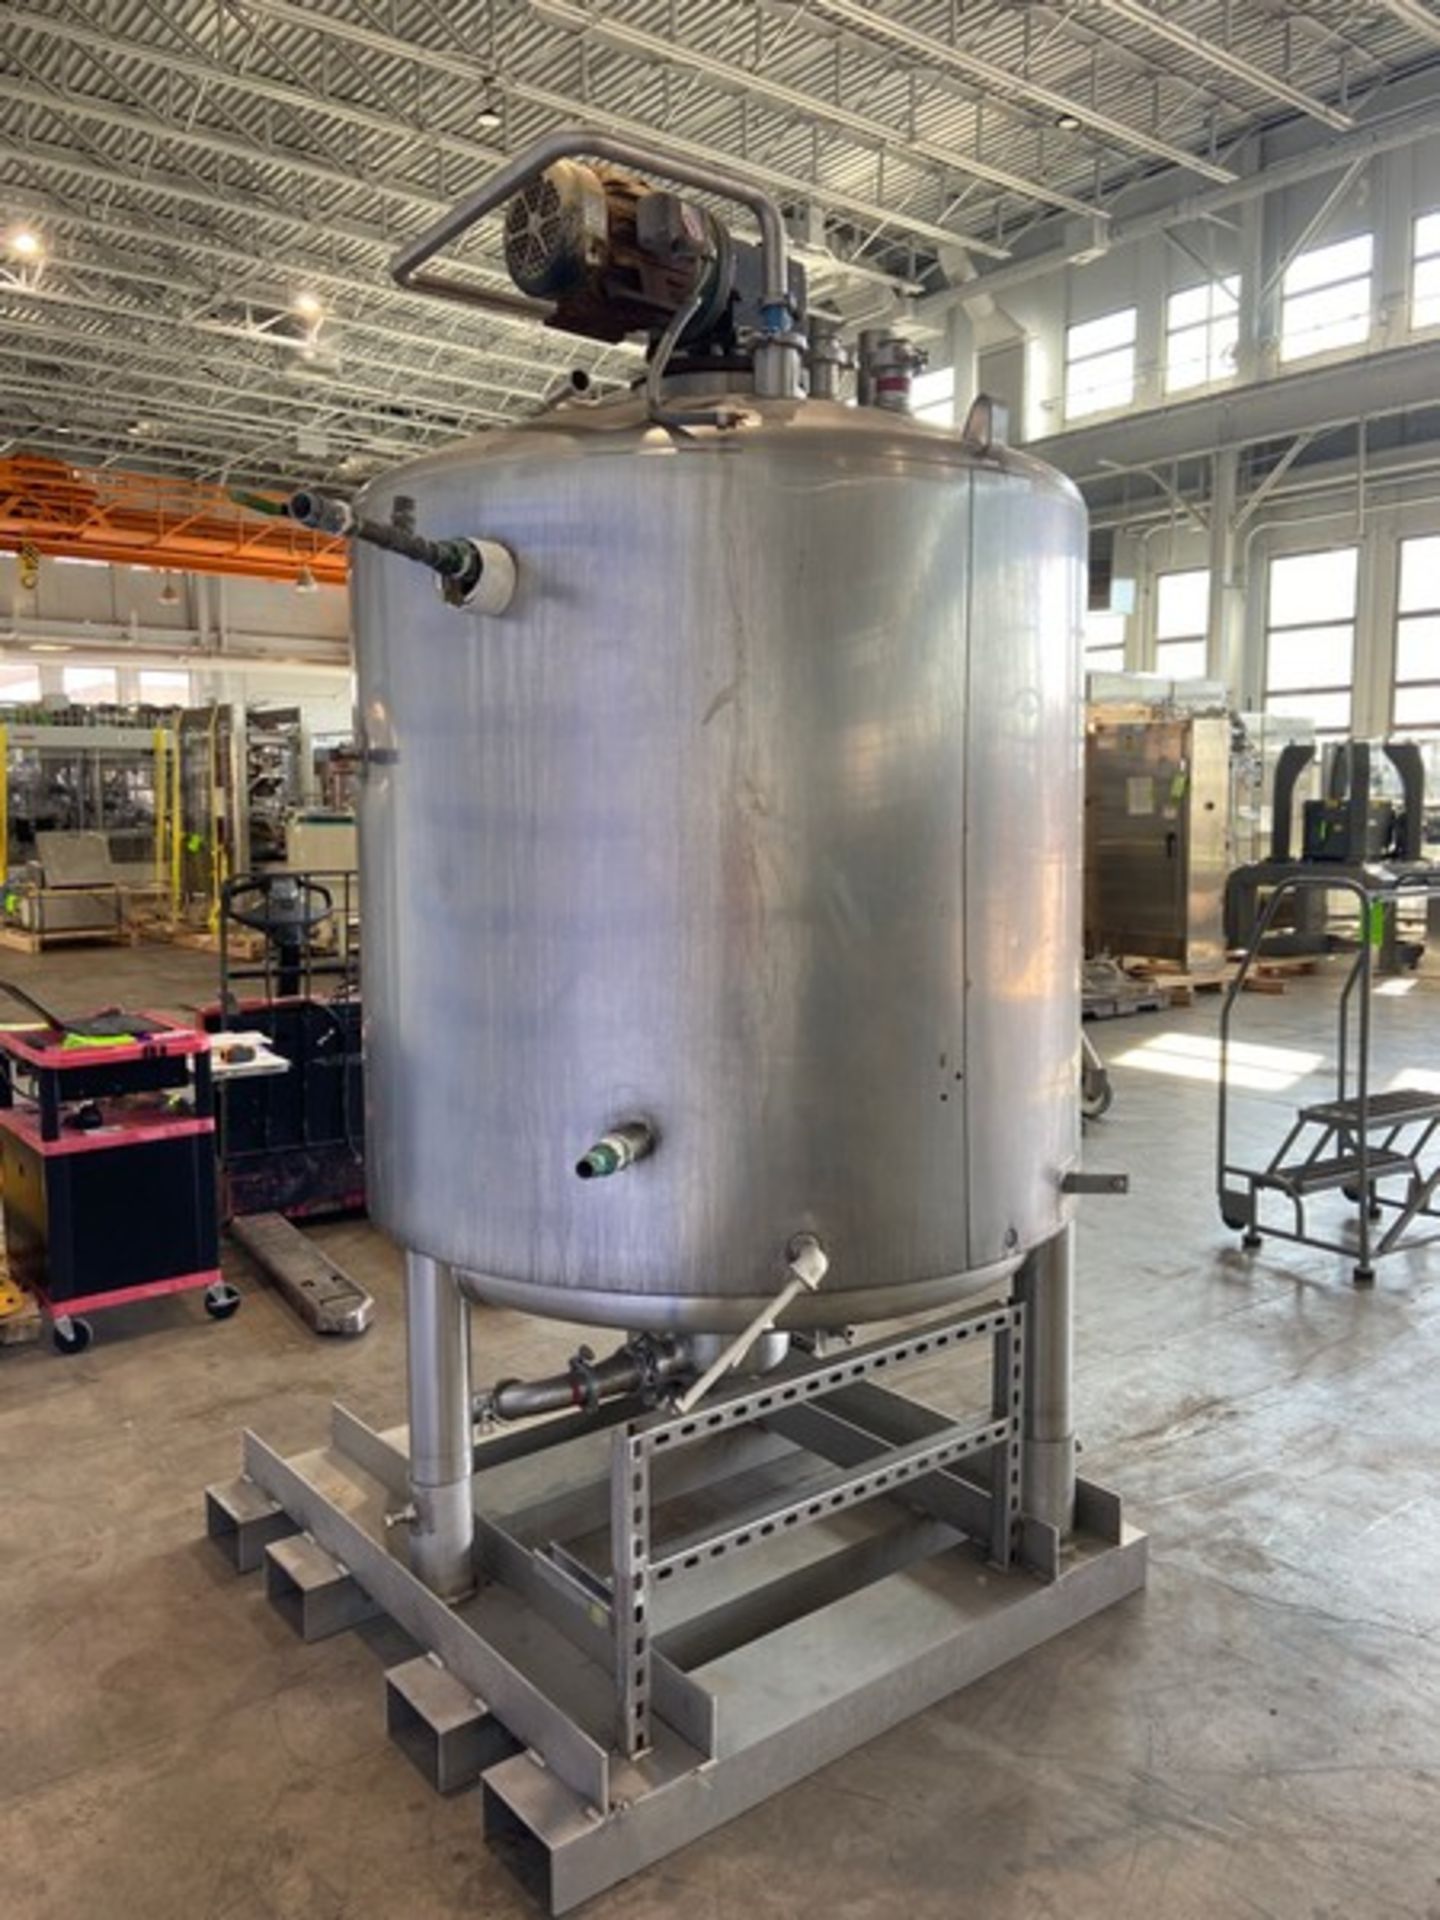 Mueller Aprox. 500 Gal. Jacketed S/S Tank, Internal Dims.: Aprox. 55" Tall x 52" Dia., with CIP - Image 3 of 13